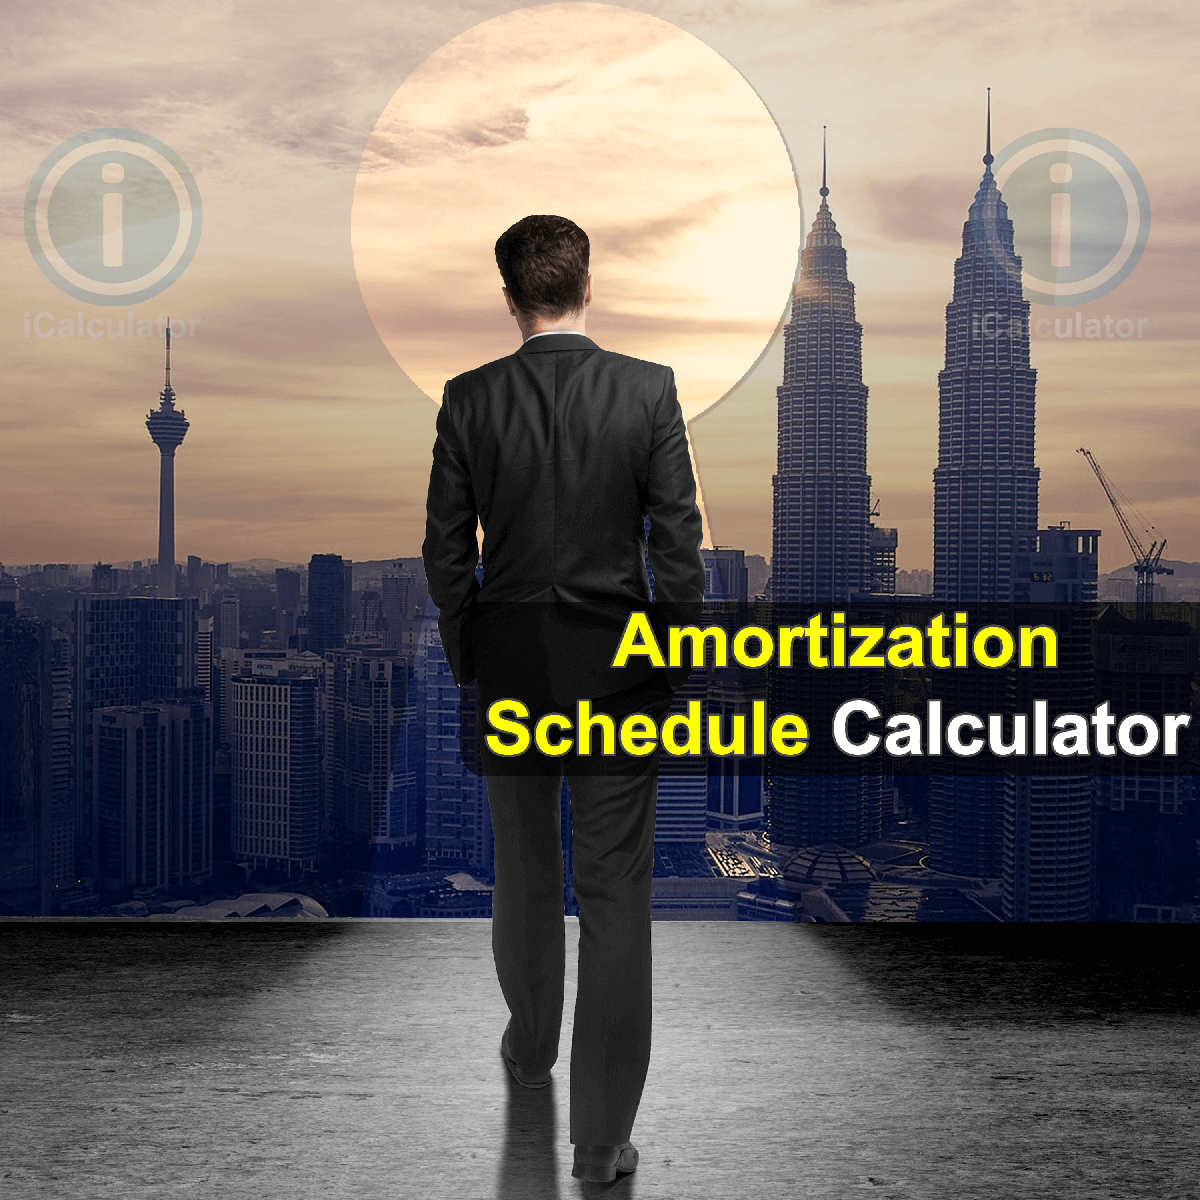 Amortization Schedule Calculator. This image provides details of how to calculate amortization using a calculator and notepad. By using the Amortization Schedule formula, the Amortization Schedule Calculator provides a true calculation of the monthly repayments and the amount of interest from borrowing or investing using amortization formula